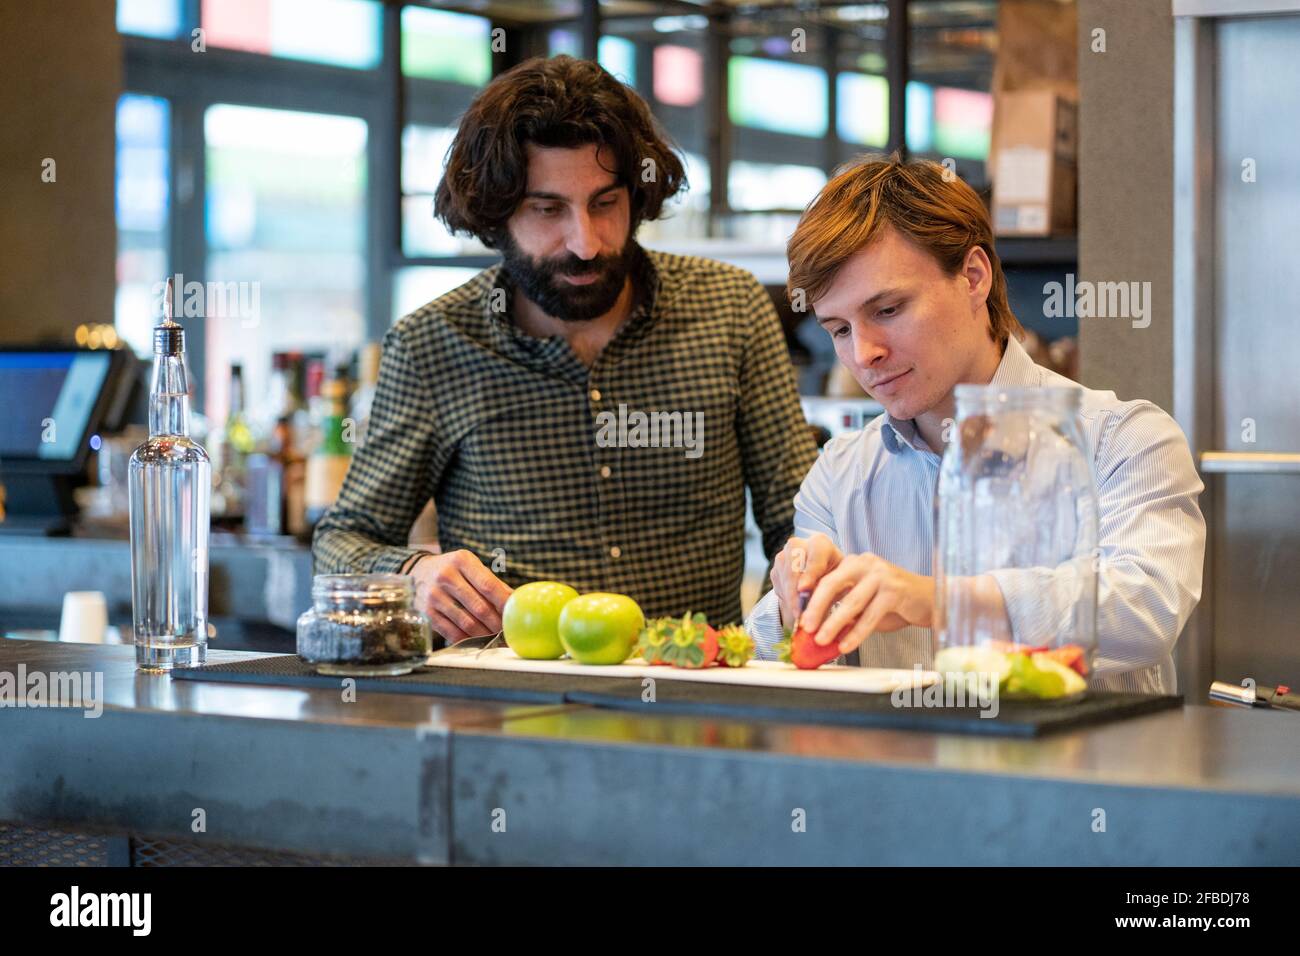 Bartender looking at trainee cutting strawberry at bar counter Stock Photo